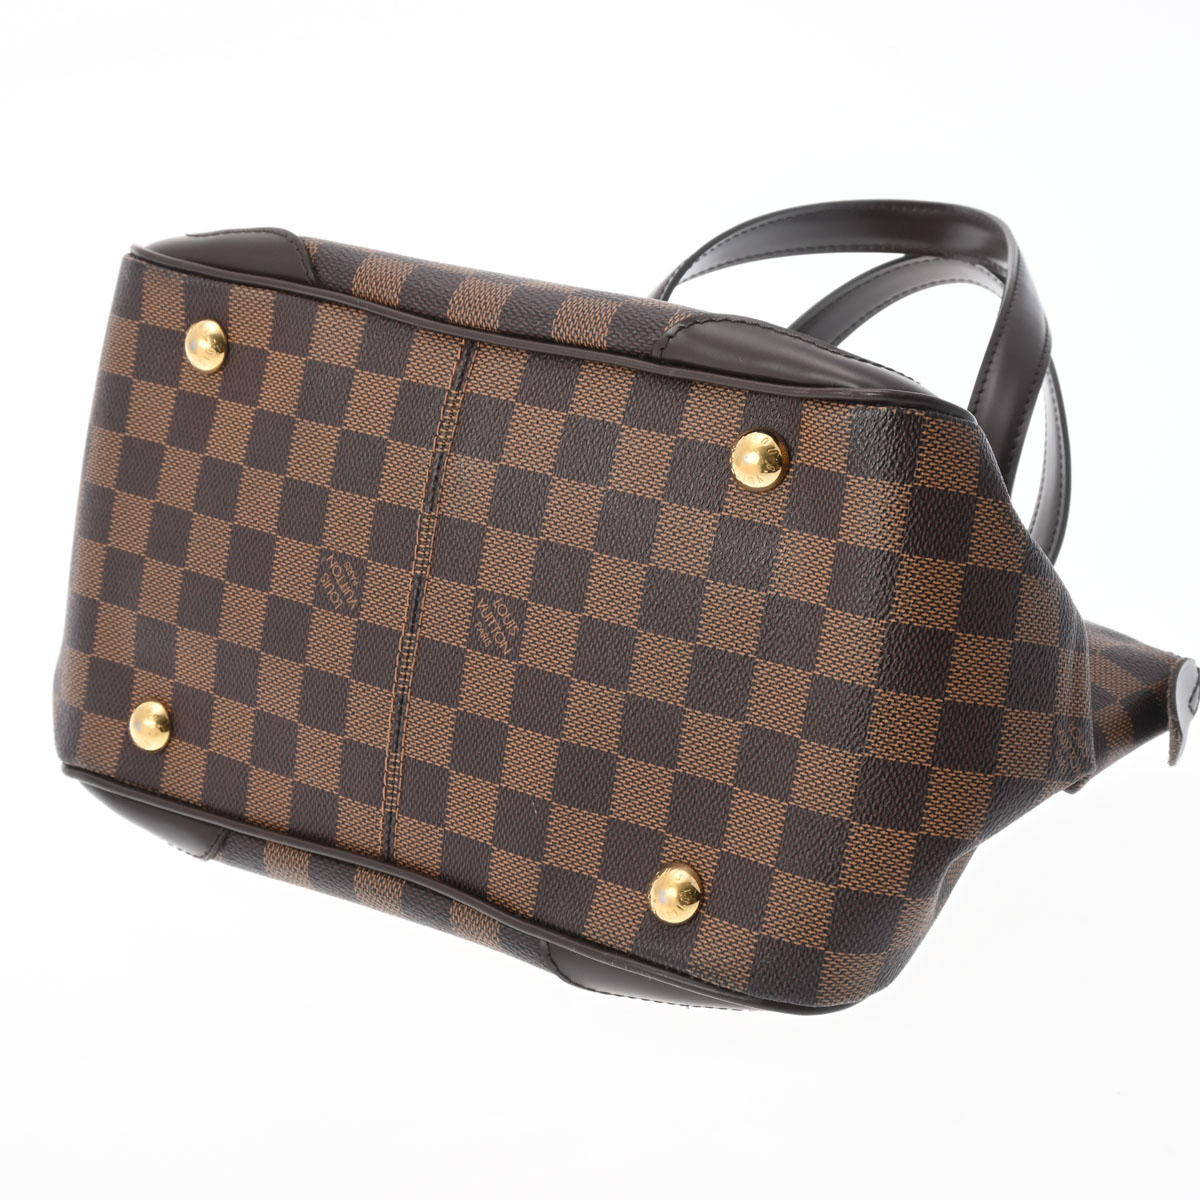 LOUIS VUITTON ルイヴィトン ダミエ ヴェローナPM ショルダーバッグ N41117 ブラウン by